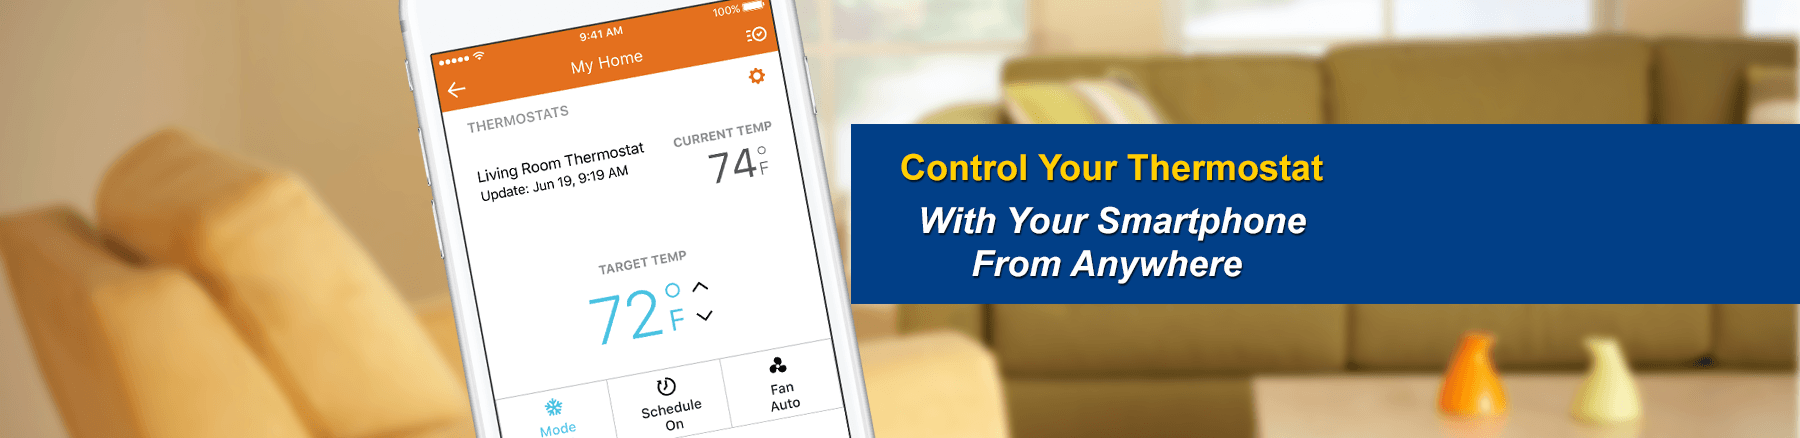 smart phone featuring thermostat control app